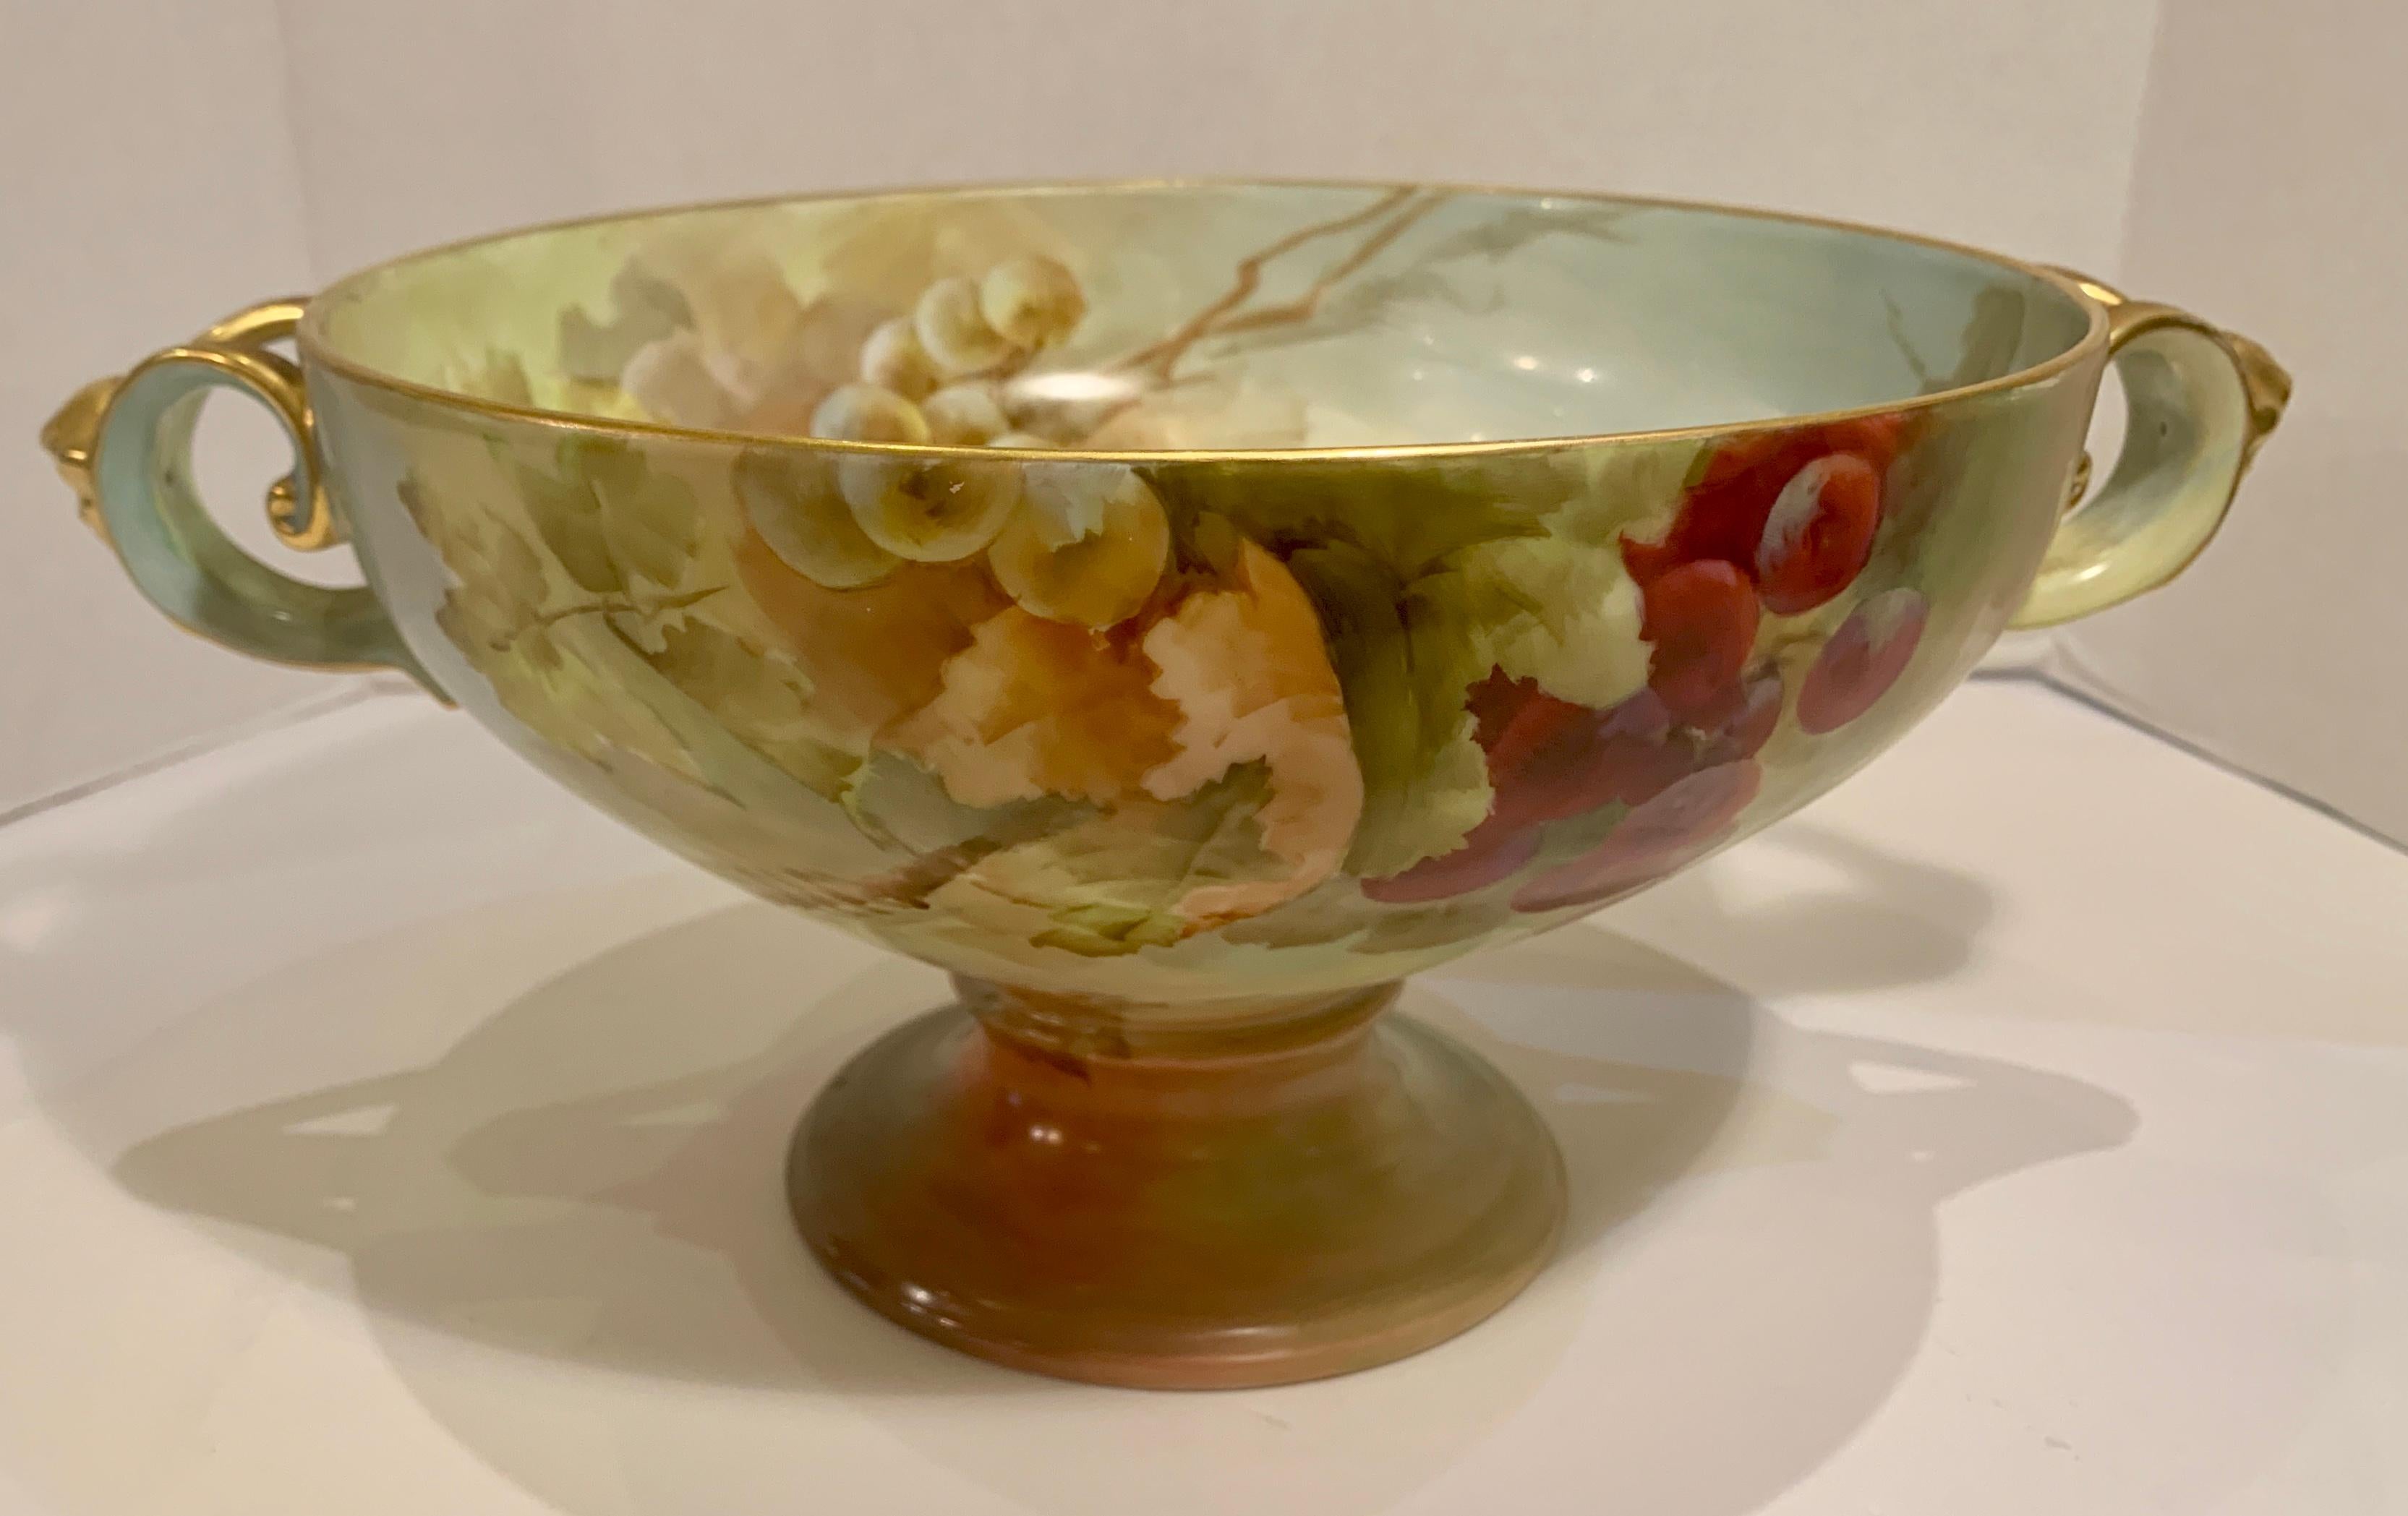 Exquisite large antique fine porcelain Art Nouveau Philipp Rosenthal Bavarian “Empire” pedestal footed centerpiece bowl is from the early 1900s. Bowl is lavishly hand painted inside and outside with magnificent, colorful and very realistic clusters